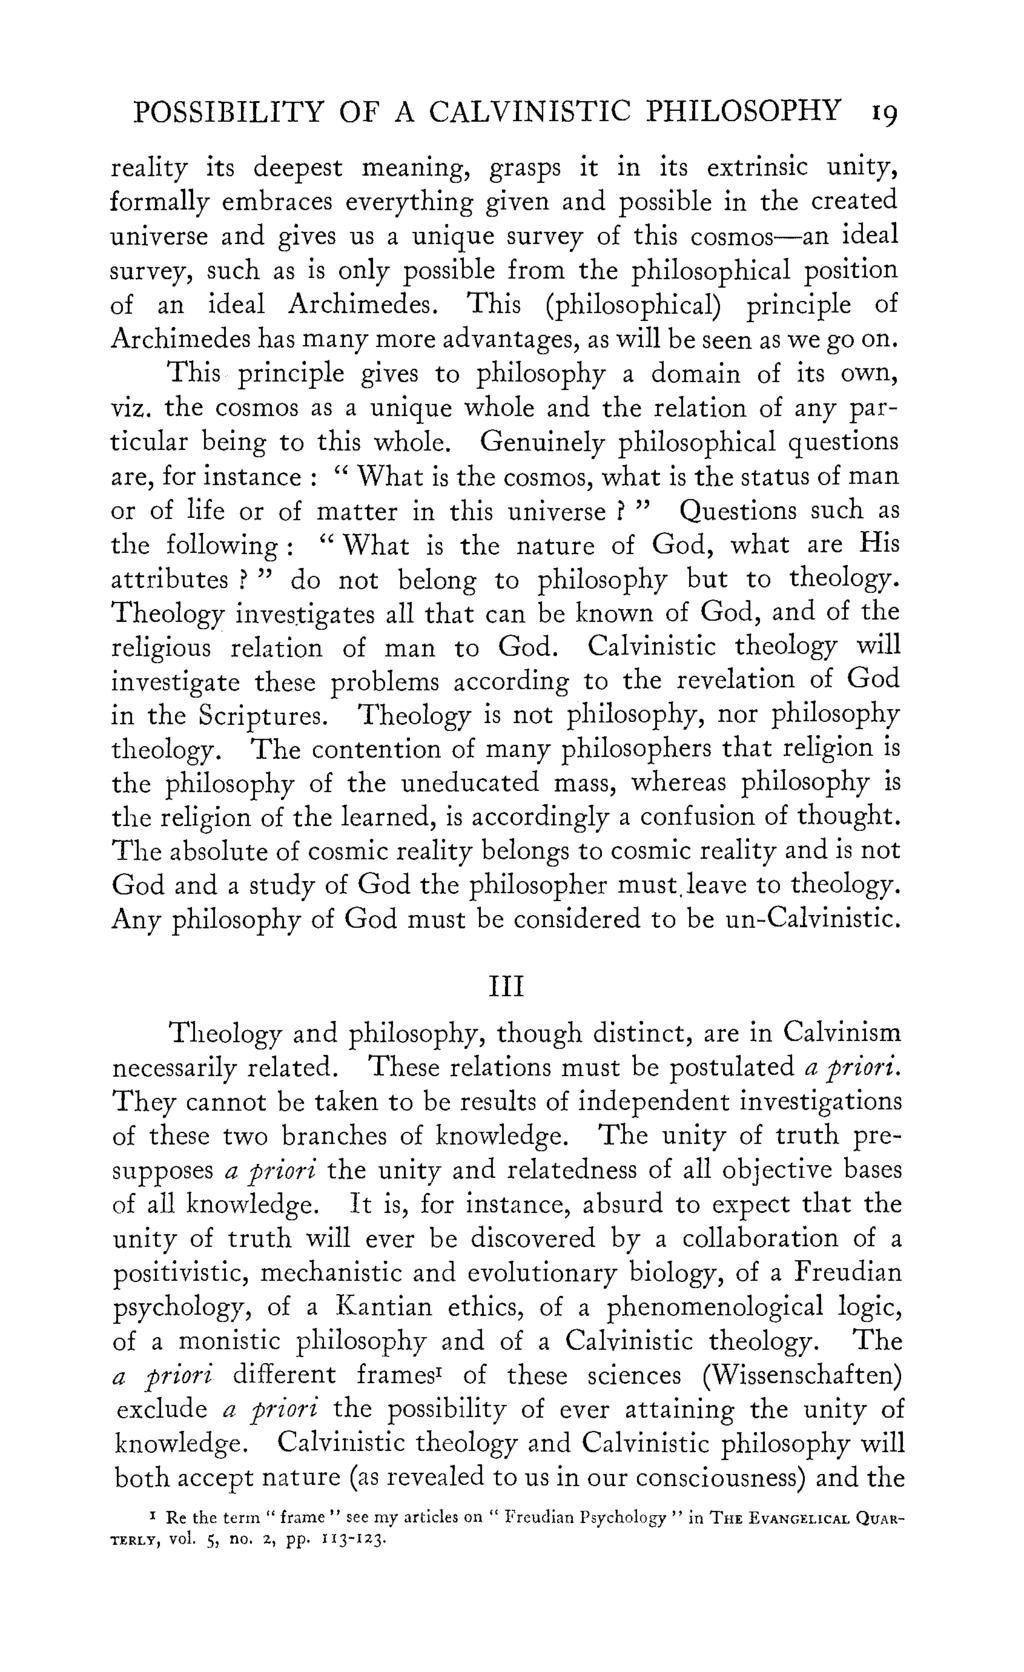 POSSIBILITY OF A CALVINISTIC PHILOSOPHY 19 reality its deepest meaning, grasps it in its extrinsic unity, formally embraces everything given and possible in the created universe and gives us a unique